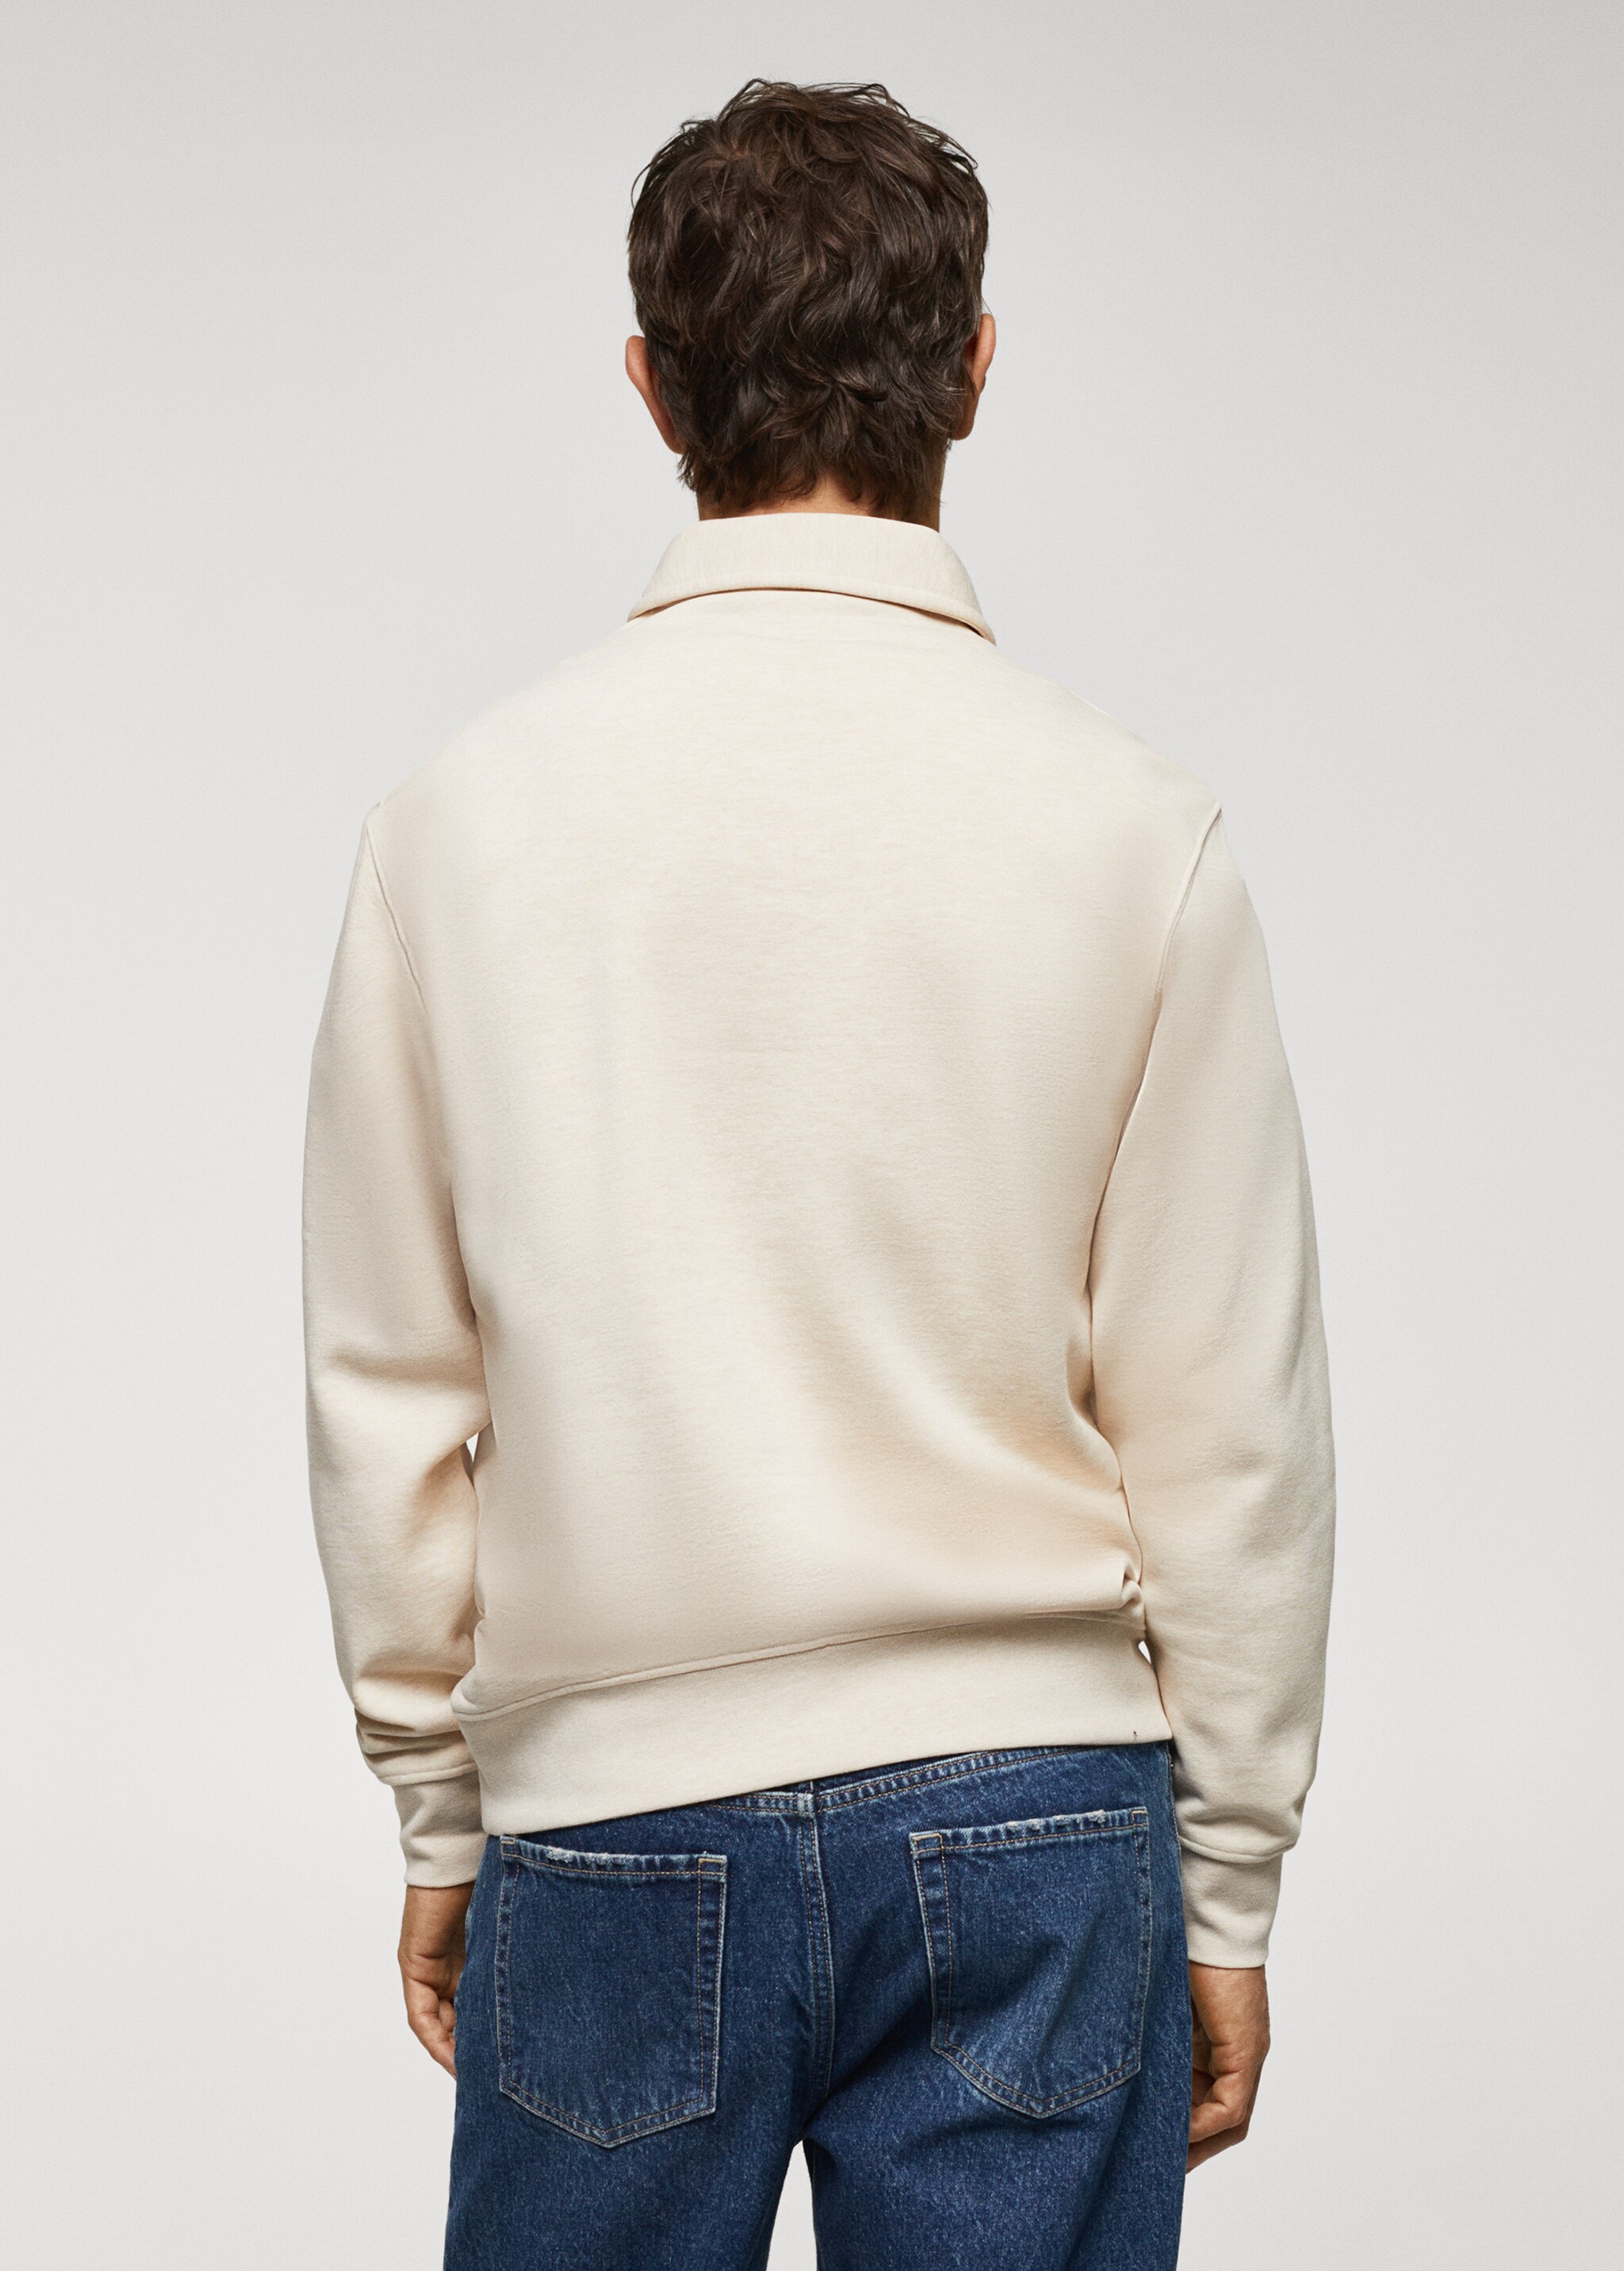 Cotton polo sweatshirt - Reverse of the article